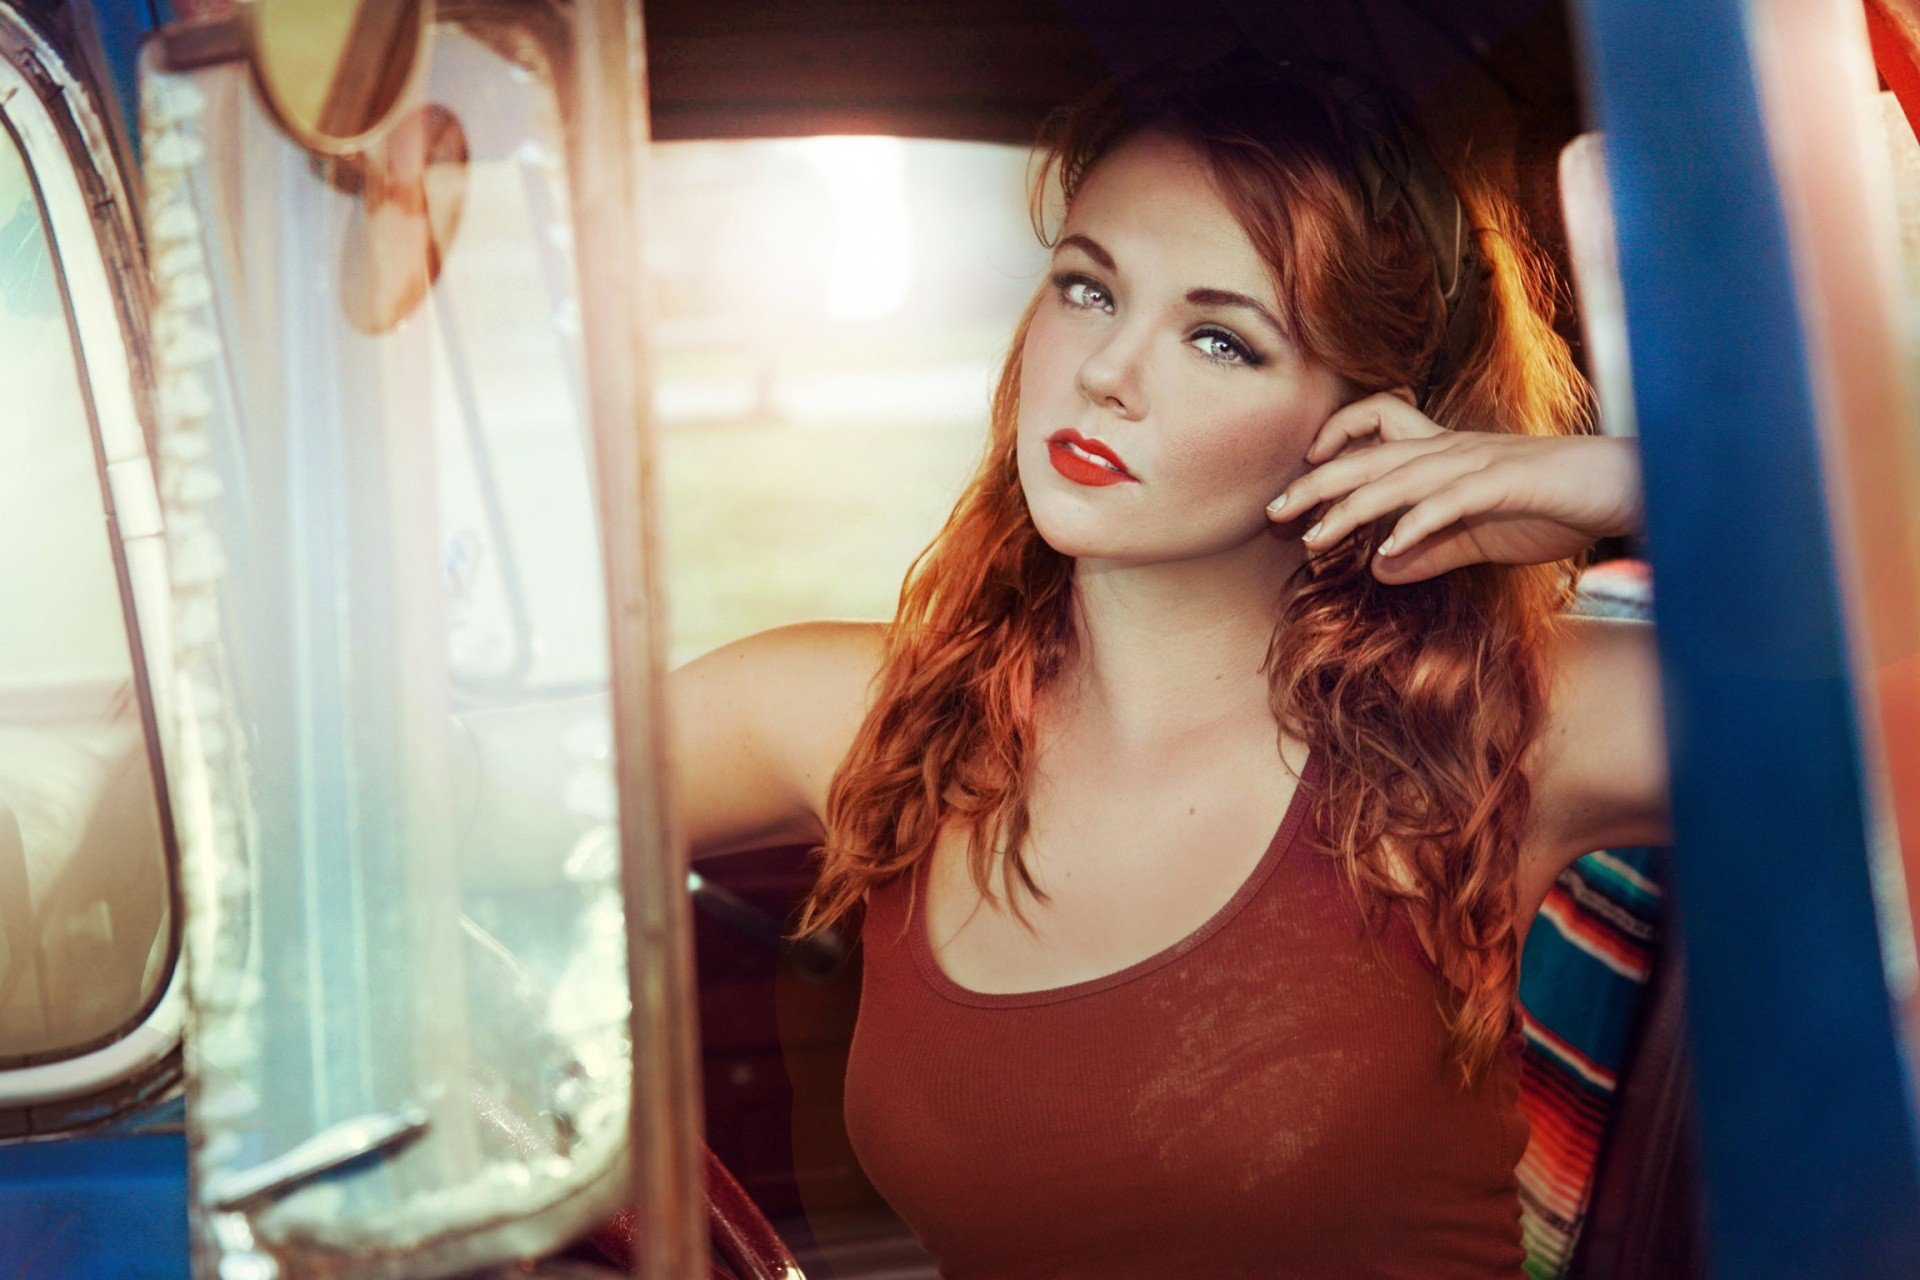 women, Redhead, Face, Car, Women with cars, Red lipstick, Blue eyes Wallpaper